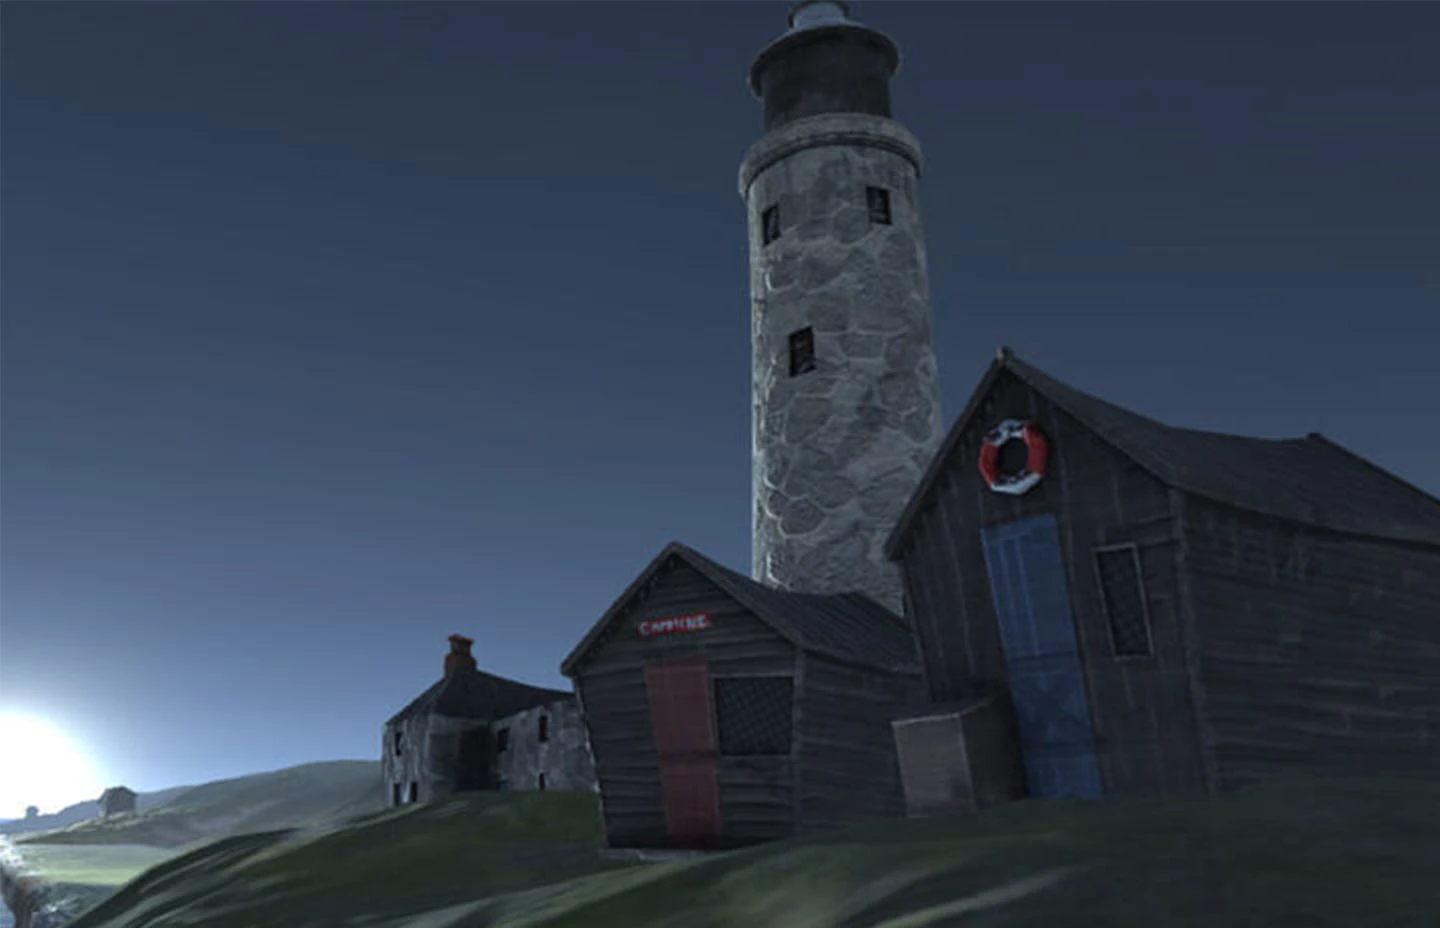 3D rendered cabins and lighthouse by the sea